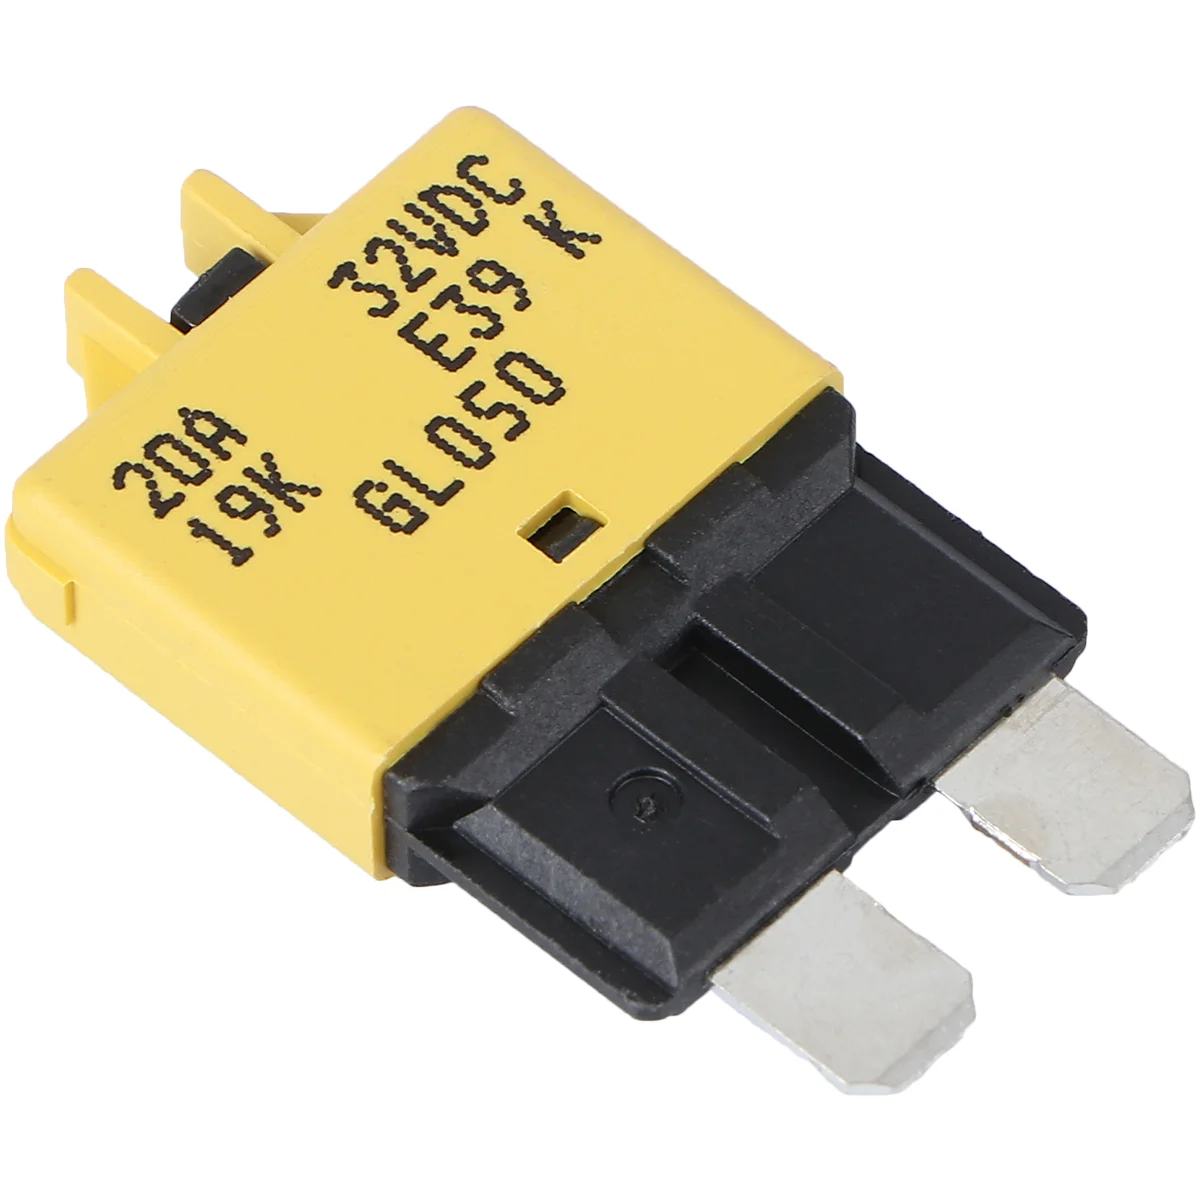 

15A 28V DC Circuit Breaker Trip Fuses Standard Fuse with Manual Reset for Car Truck Yellow